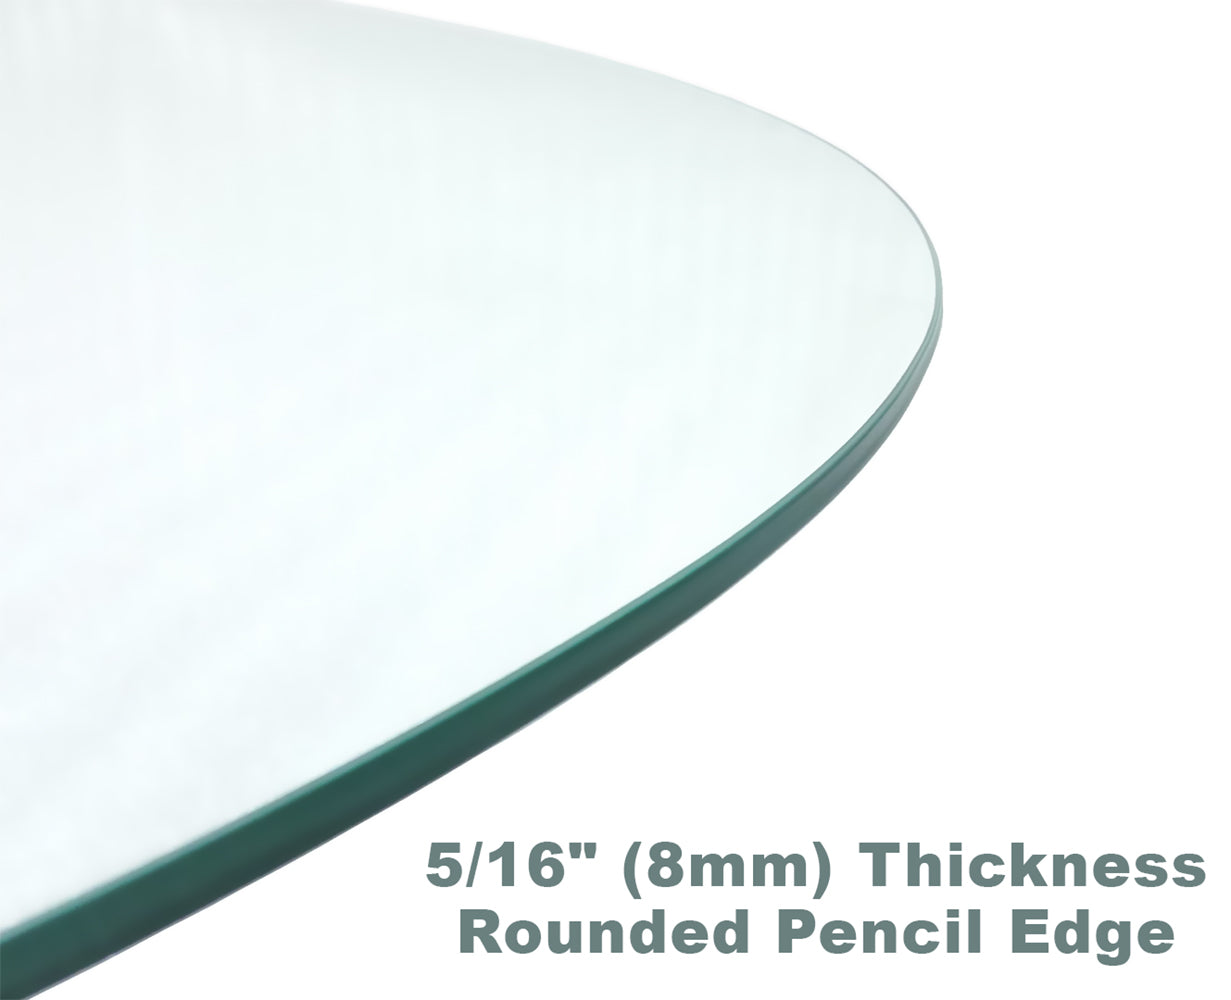 Audio-Visual Direct Tempered Glass Table Top with Rounded Edge